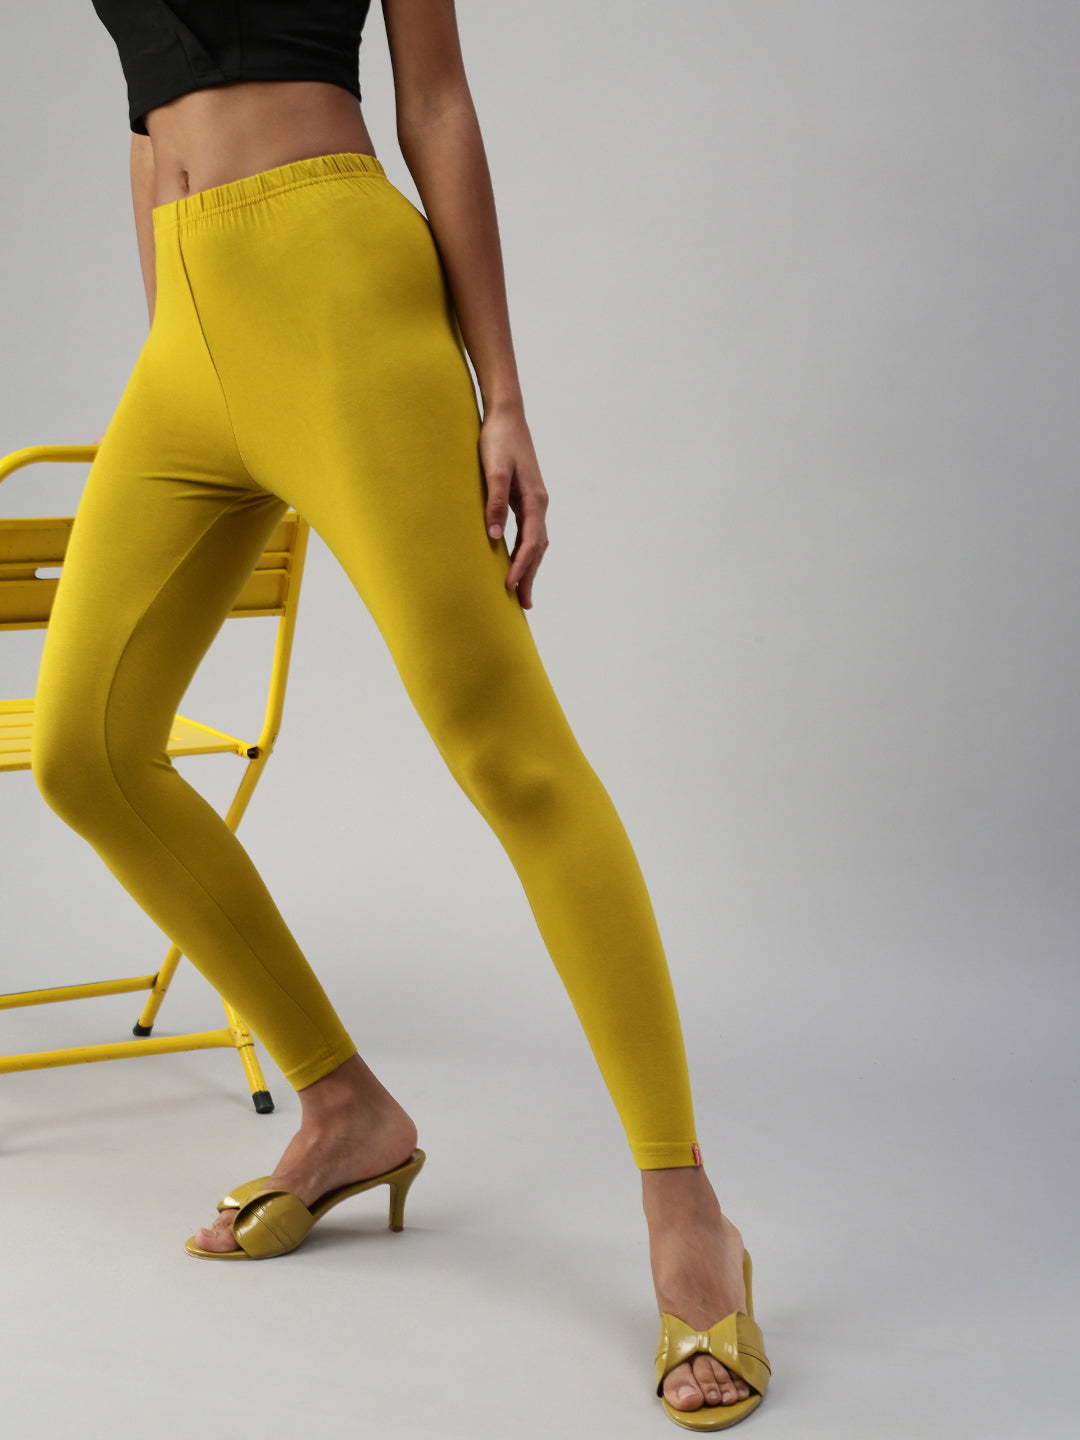 BrandPrisma - Wear Prisma's ankle length leggings with either your most  #modern top or even an #ethnic one. These comfortable #leggings can blend  with both casual and sophisticated styles. Check it out